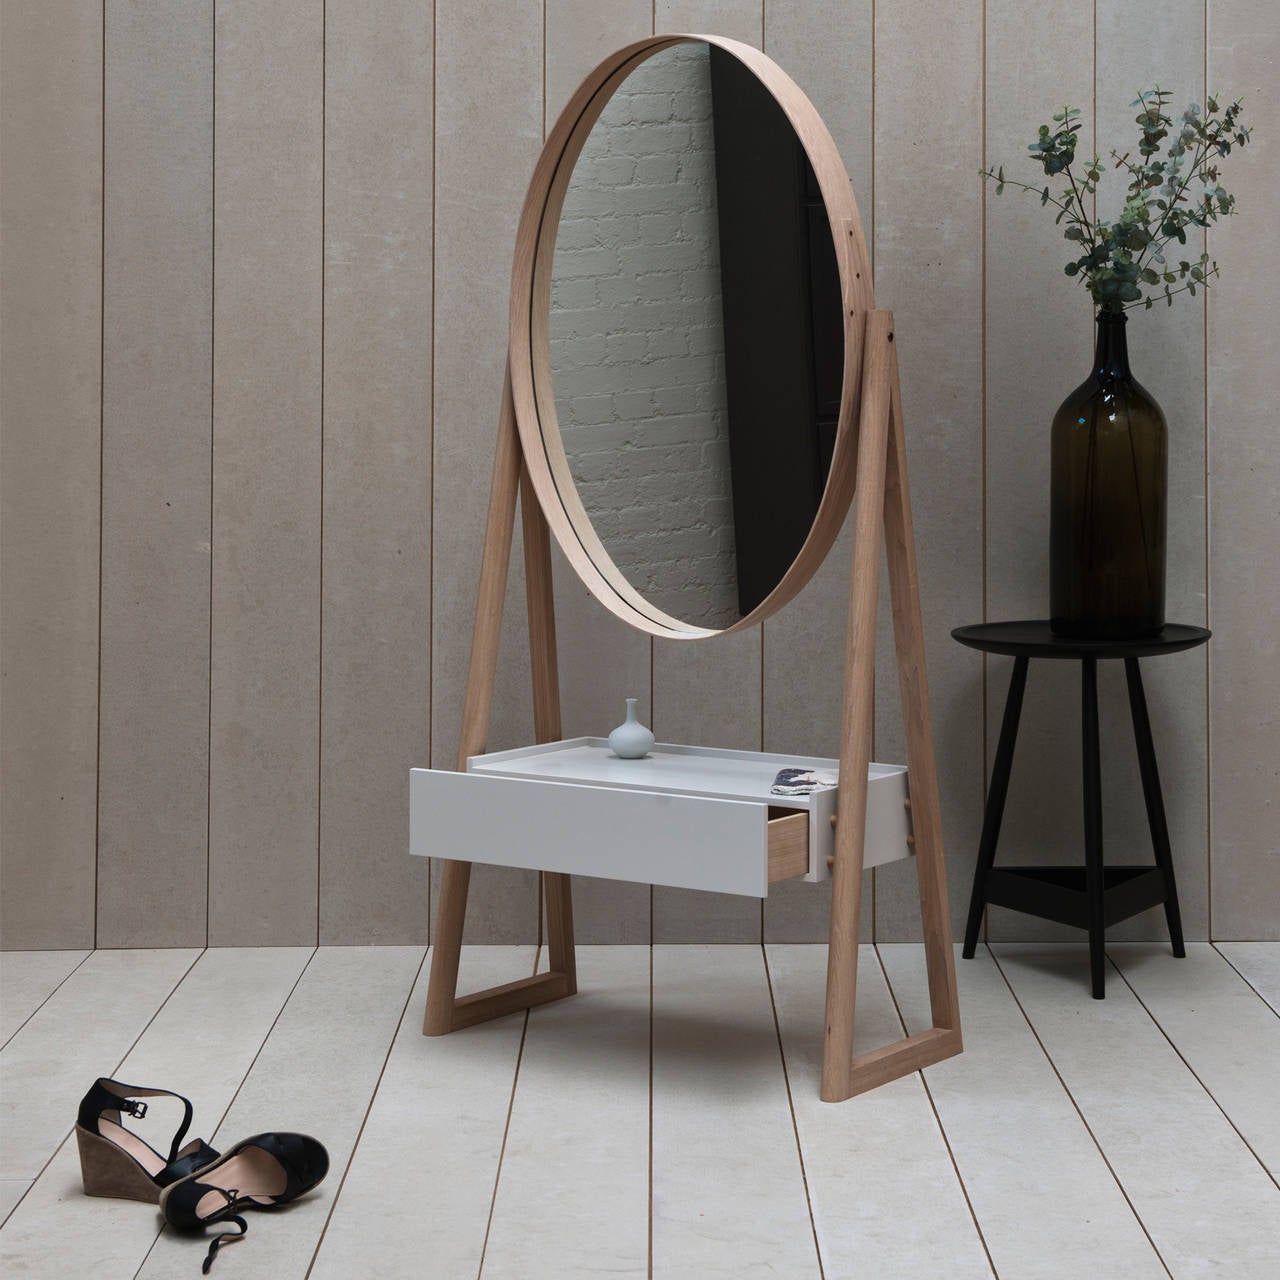 A full-length pivoting elliptical mirror with a shaker-style joint and brass rivet detail at one side held in an A-frame with a lacquered drawer box below.